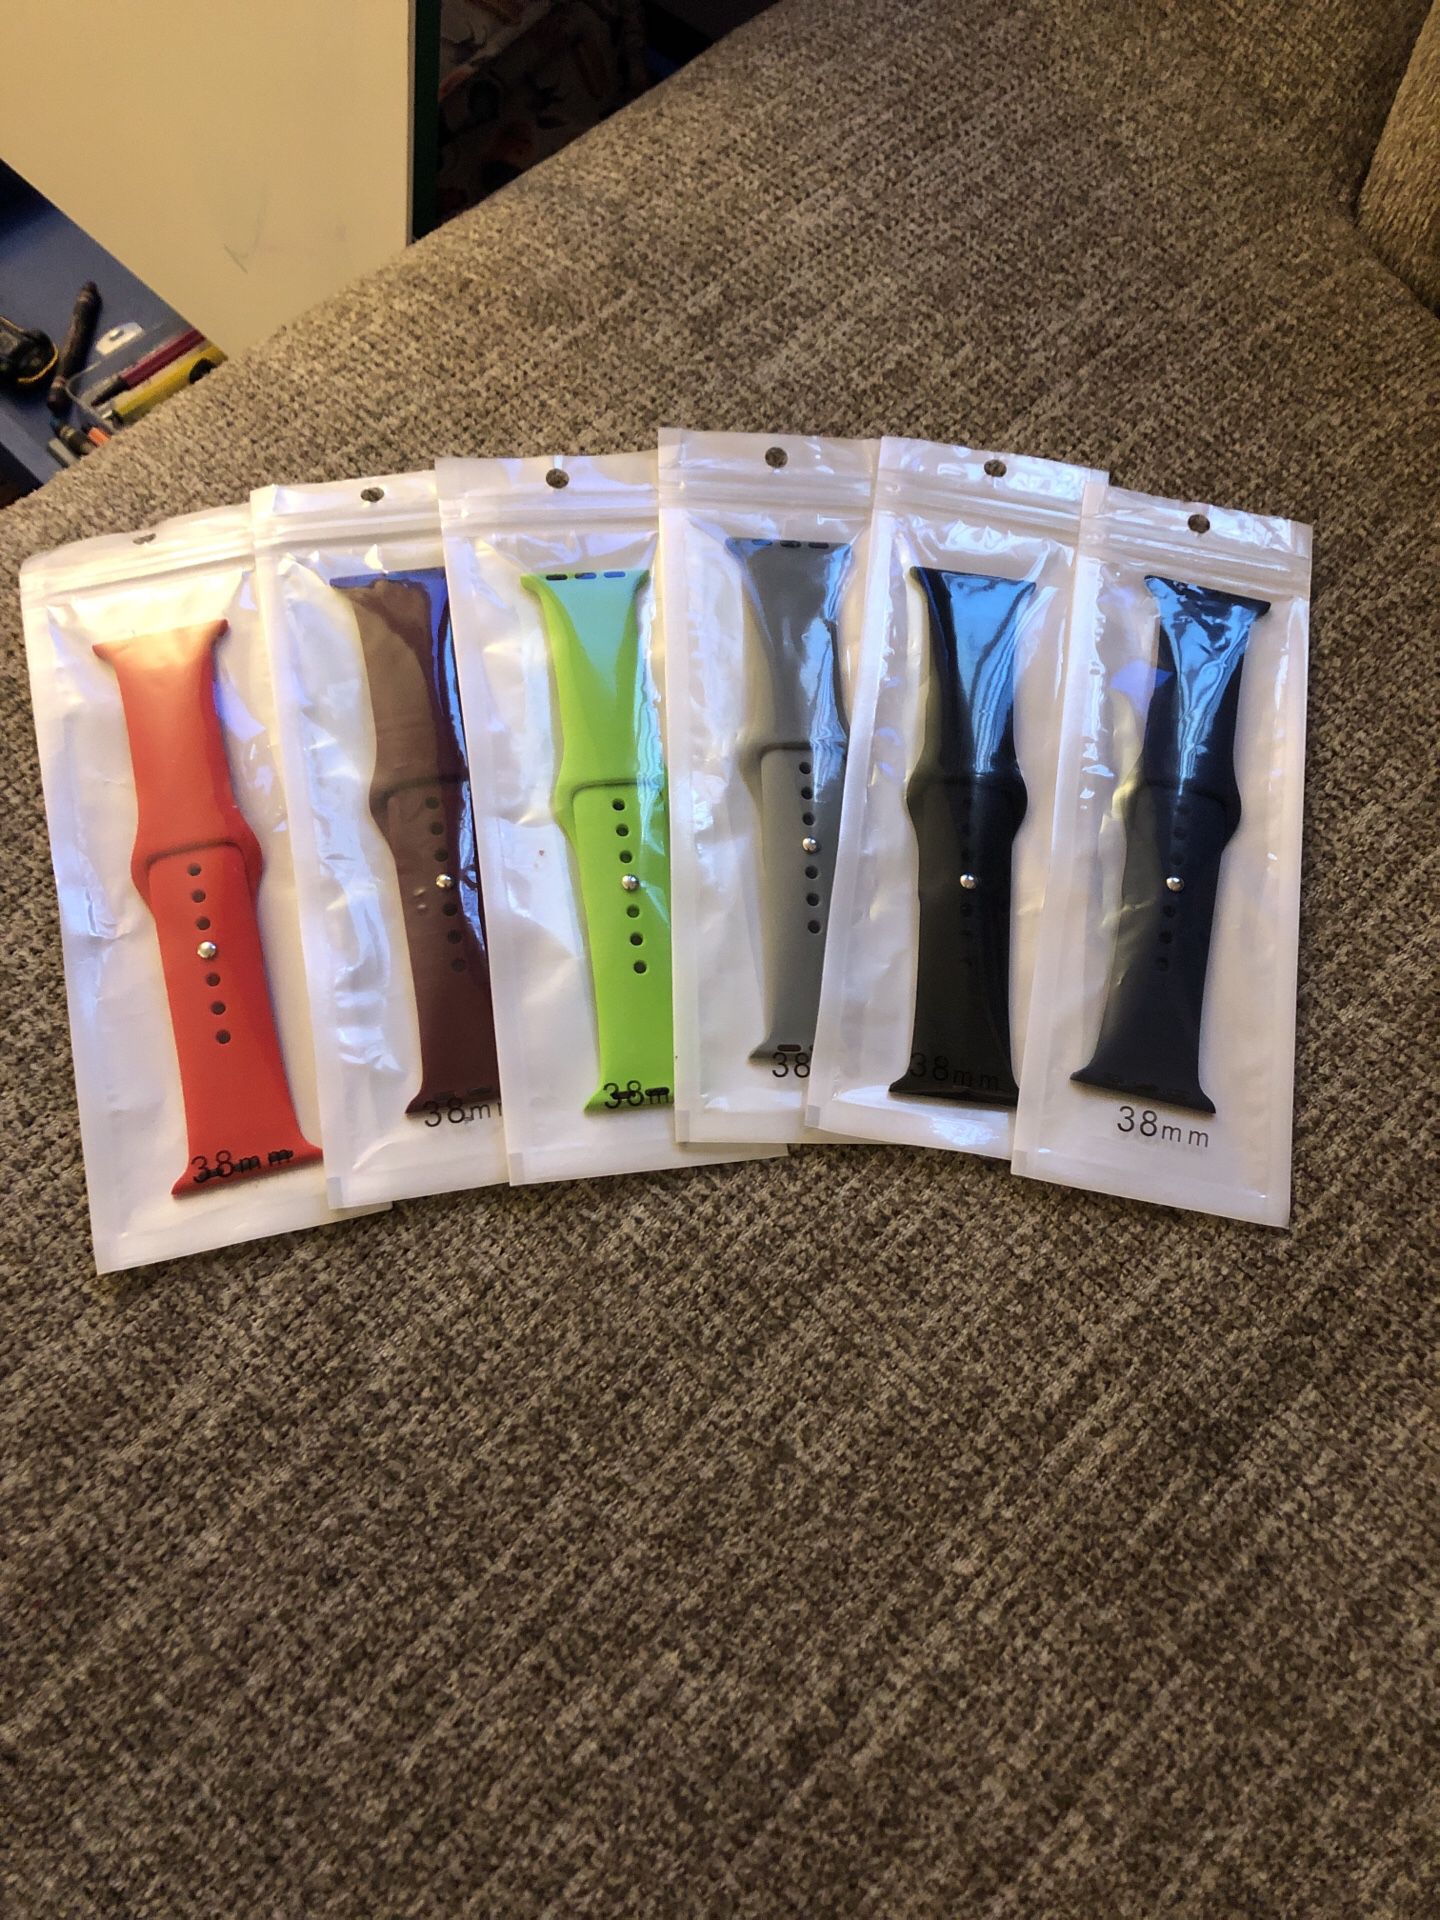 Apple Watch 38mm bands $50 for all